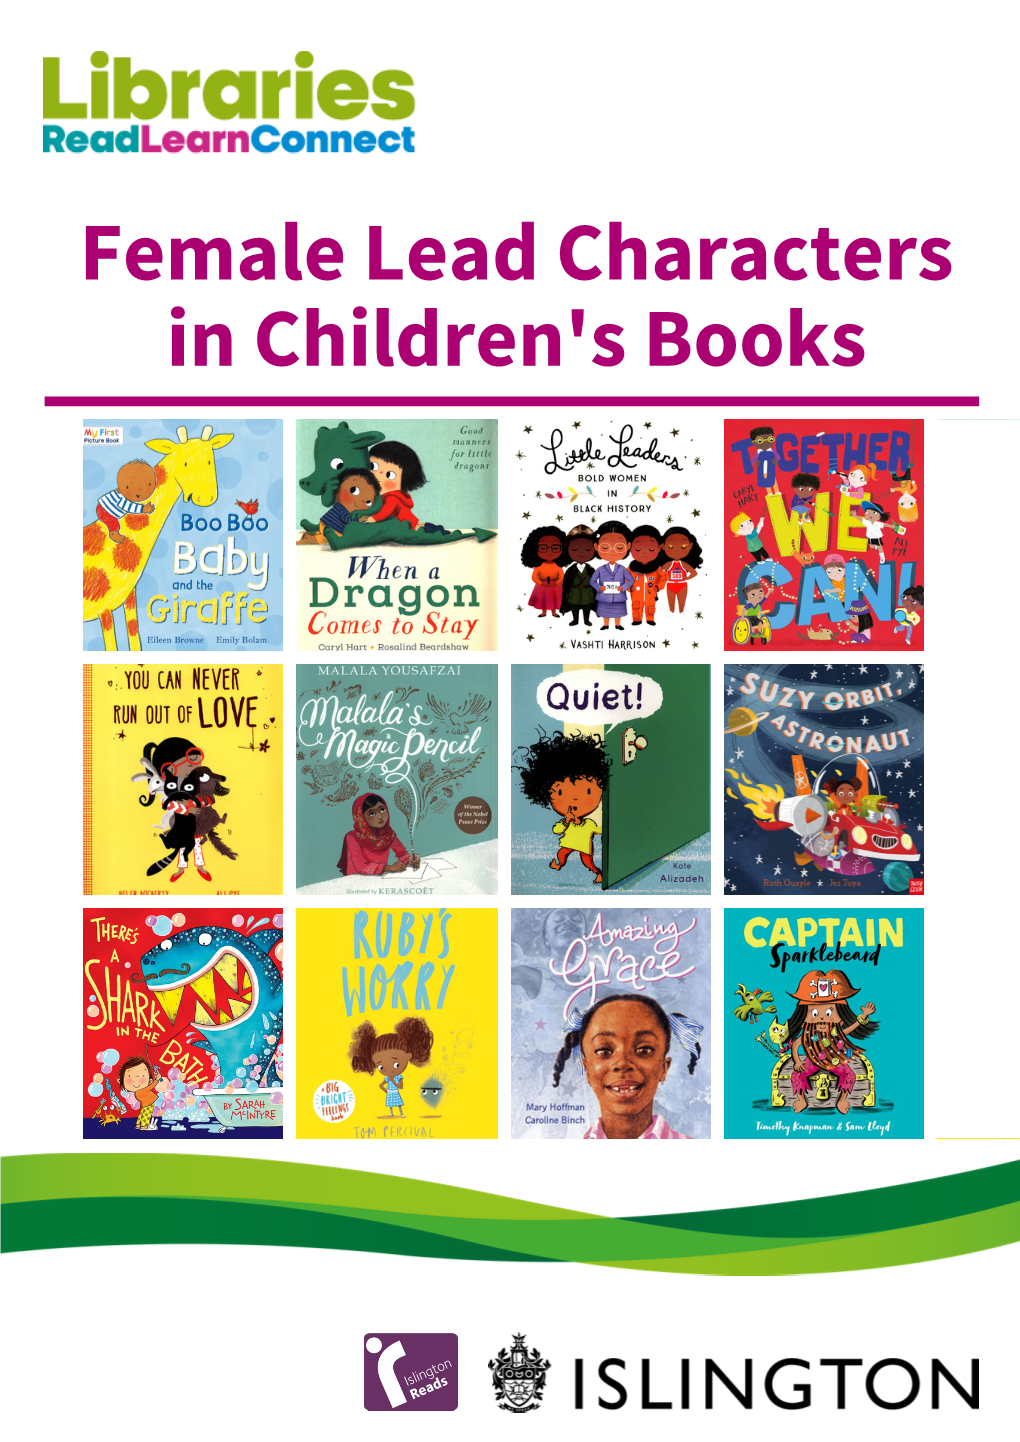 Female Lead Characters in Children's Books